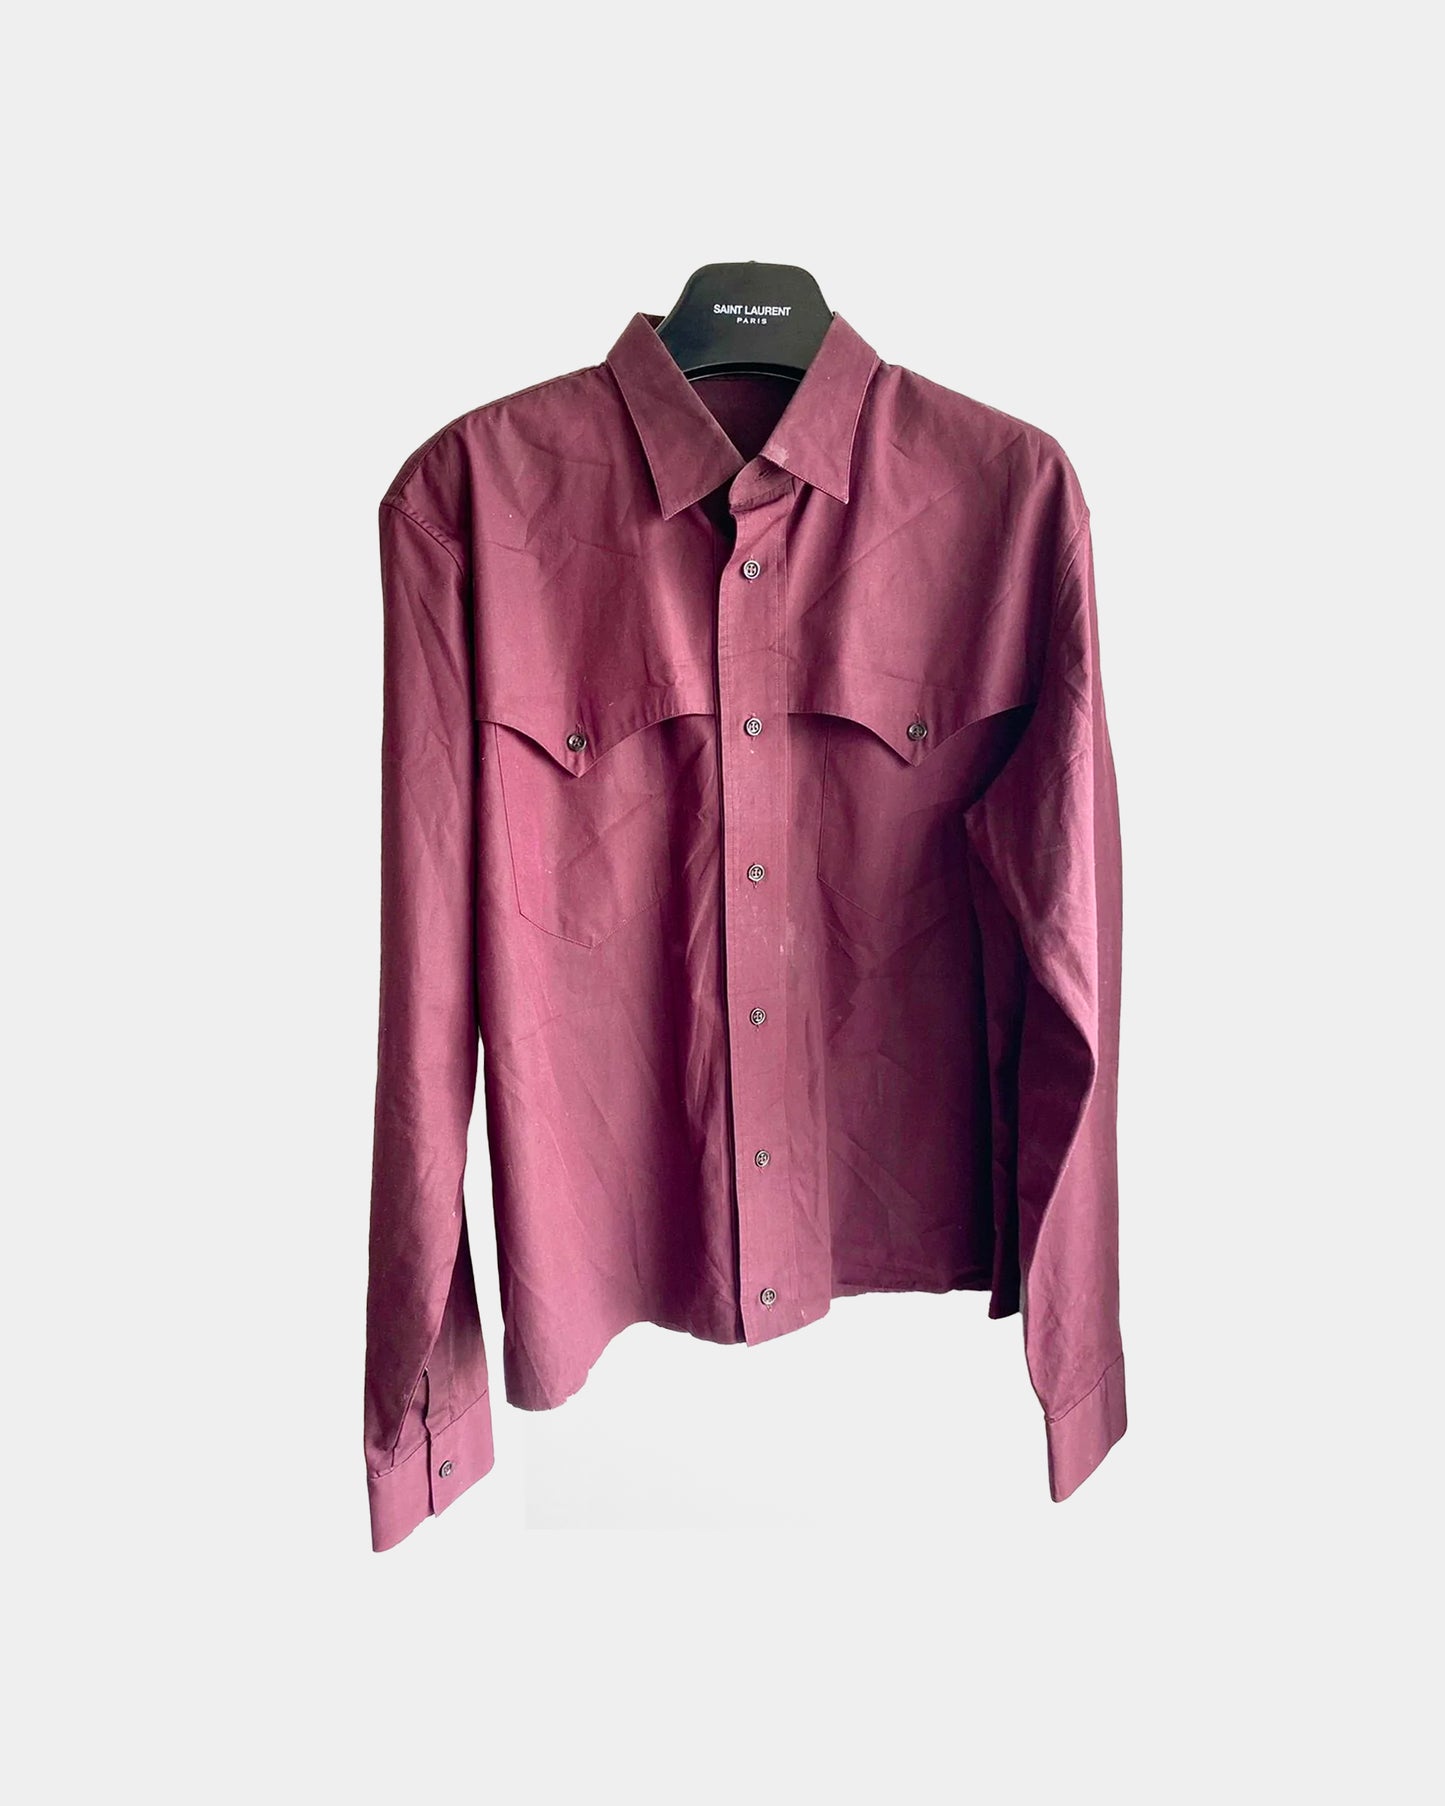 Dior Homme 05 THRASHED Western Button Up Shirt